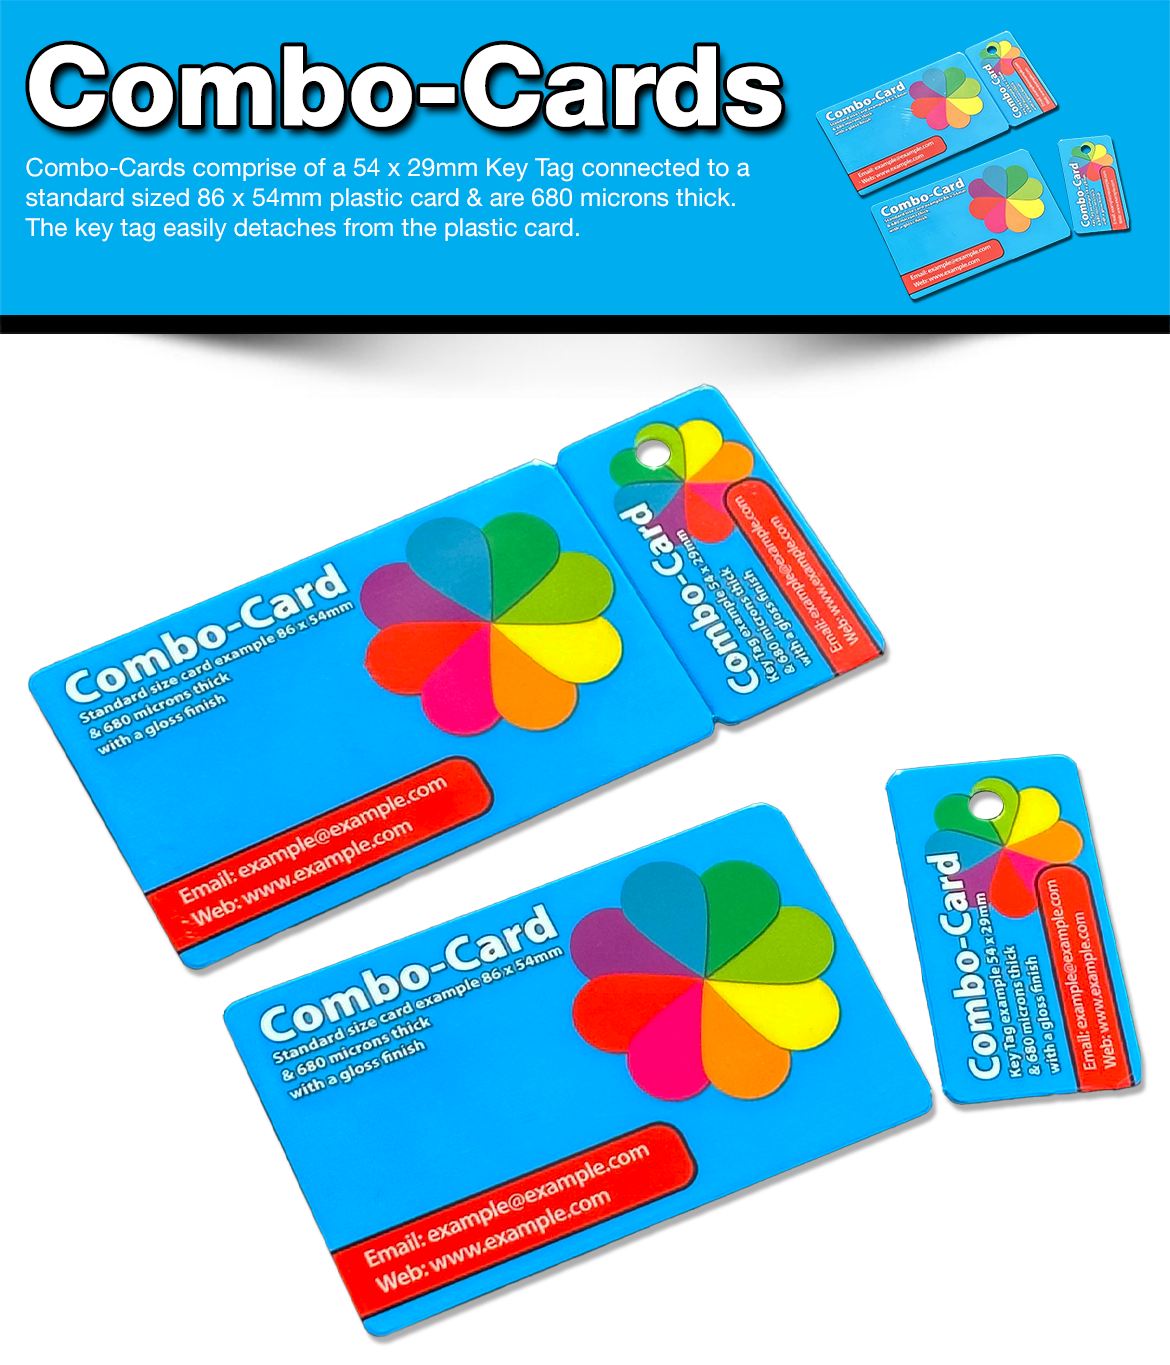 Combo-Cards printed